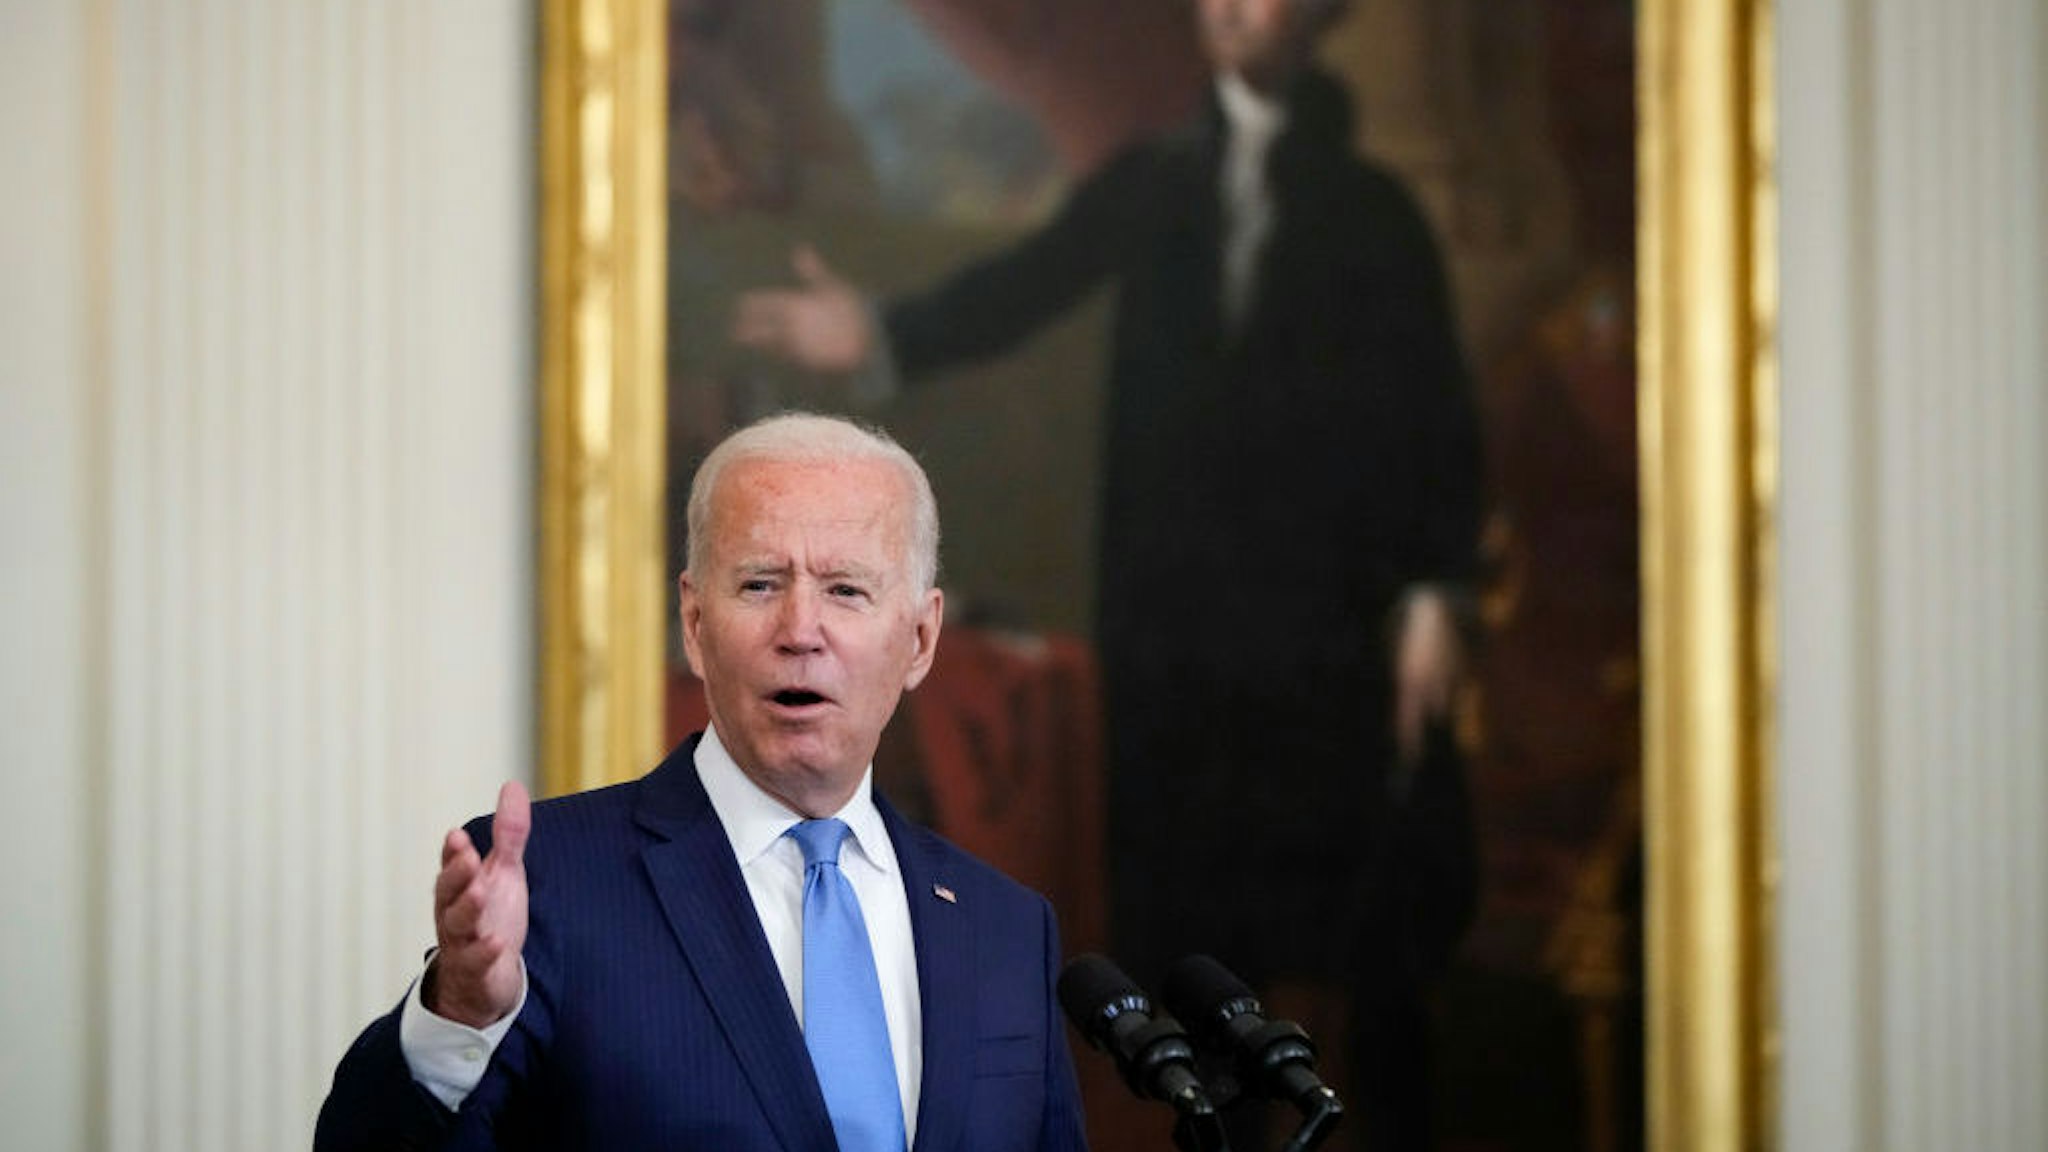 WASHINGTON, DC - AUGUST 23: U.S. President Joe Biden speaks during an event to honor the 2020 WNBA champions Seattle Storm in the East Room of the White House on August 23, 2021 in Washington, DC. The Storm defeated the Last Vegas Aces in the 2020 WNBA Finals to win their 4th title as a franchise. (Photo by Drew Angerer/Getty Images)